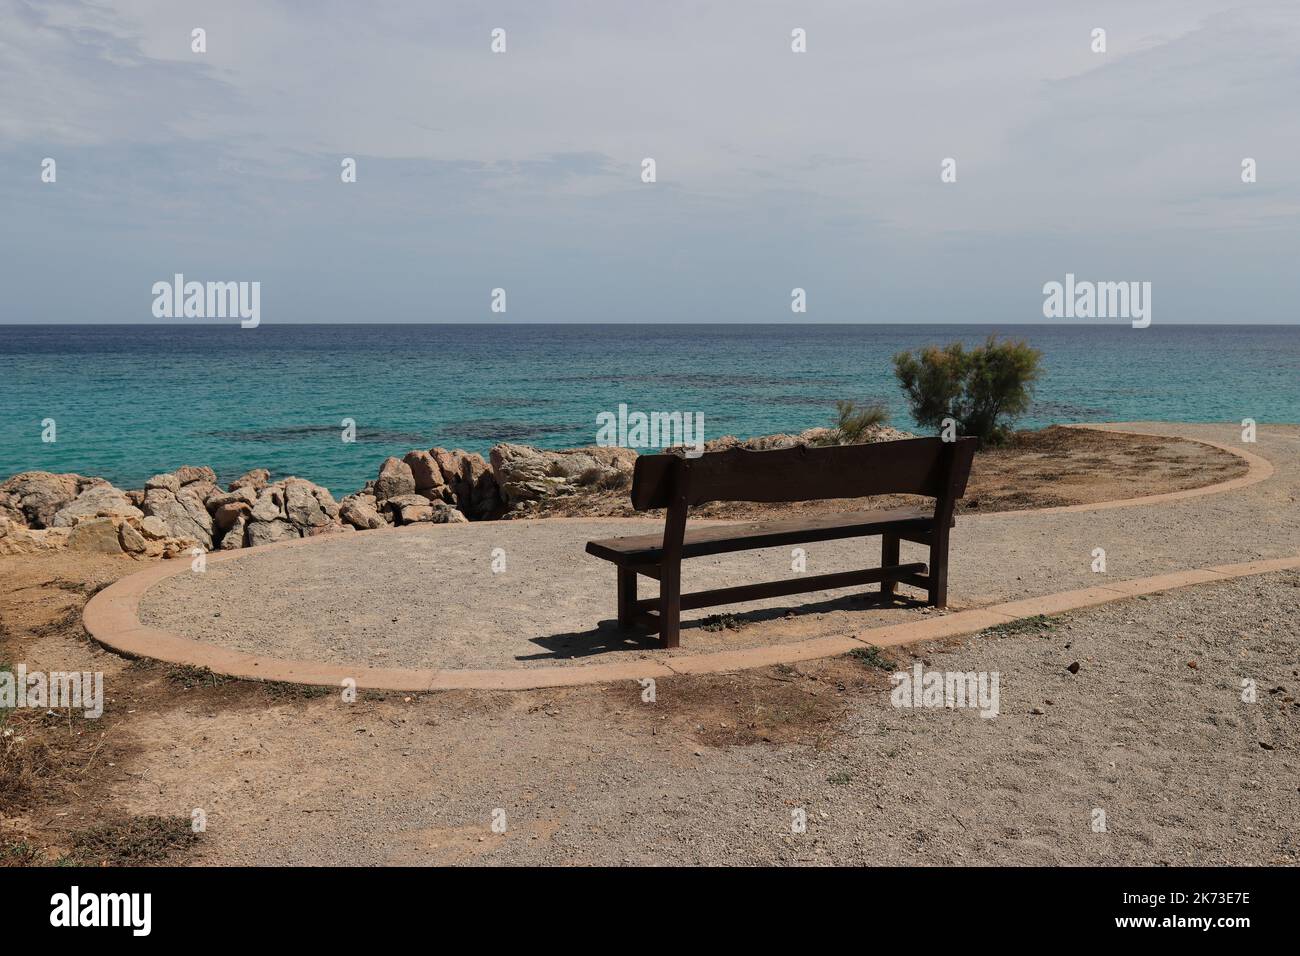 with a direct view of the sea, a small wooden bench stands on a beach promenade and is waiting for walkers, copy space Stock Photo